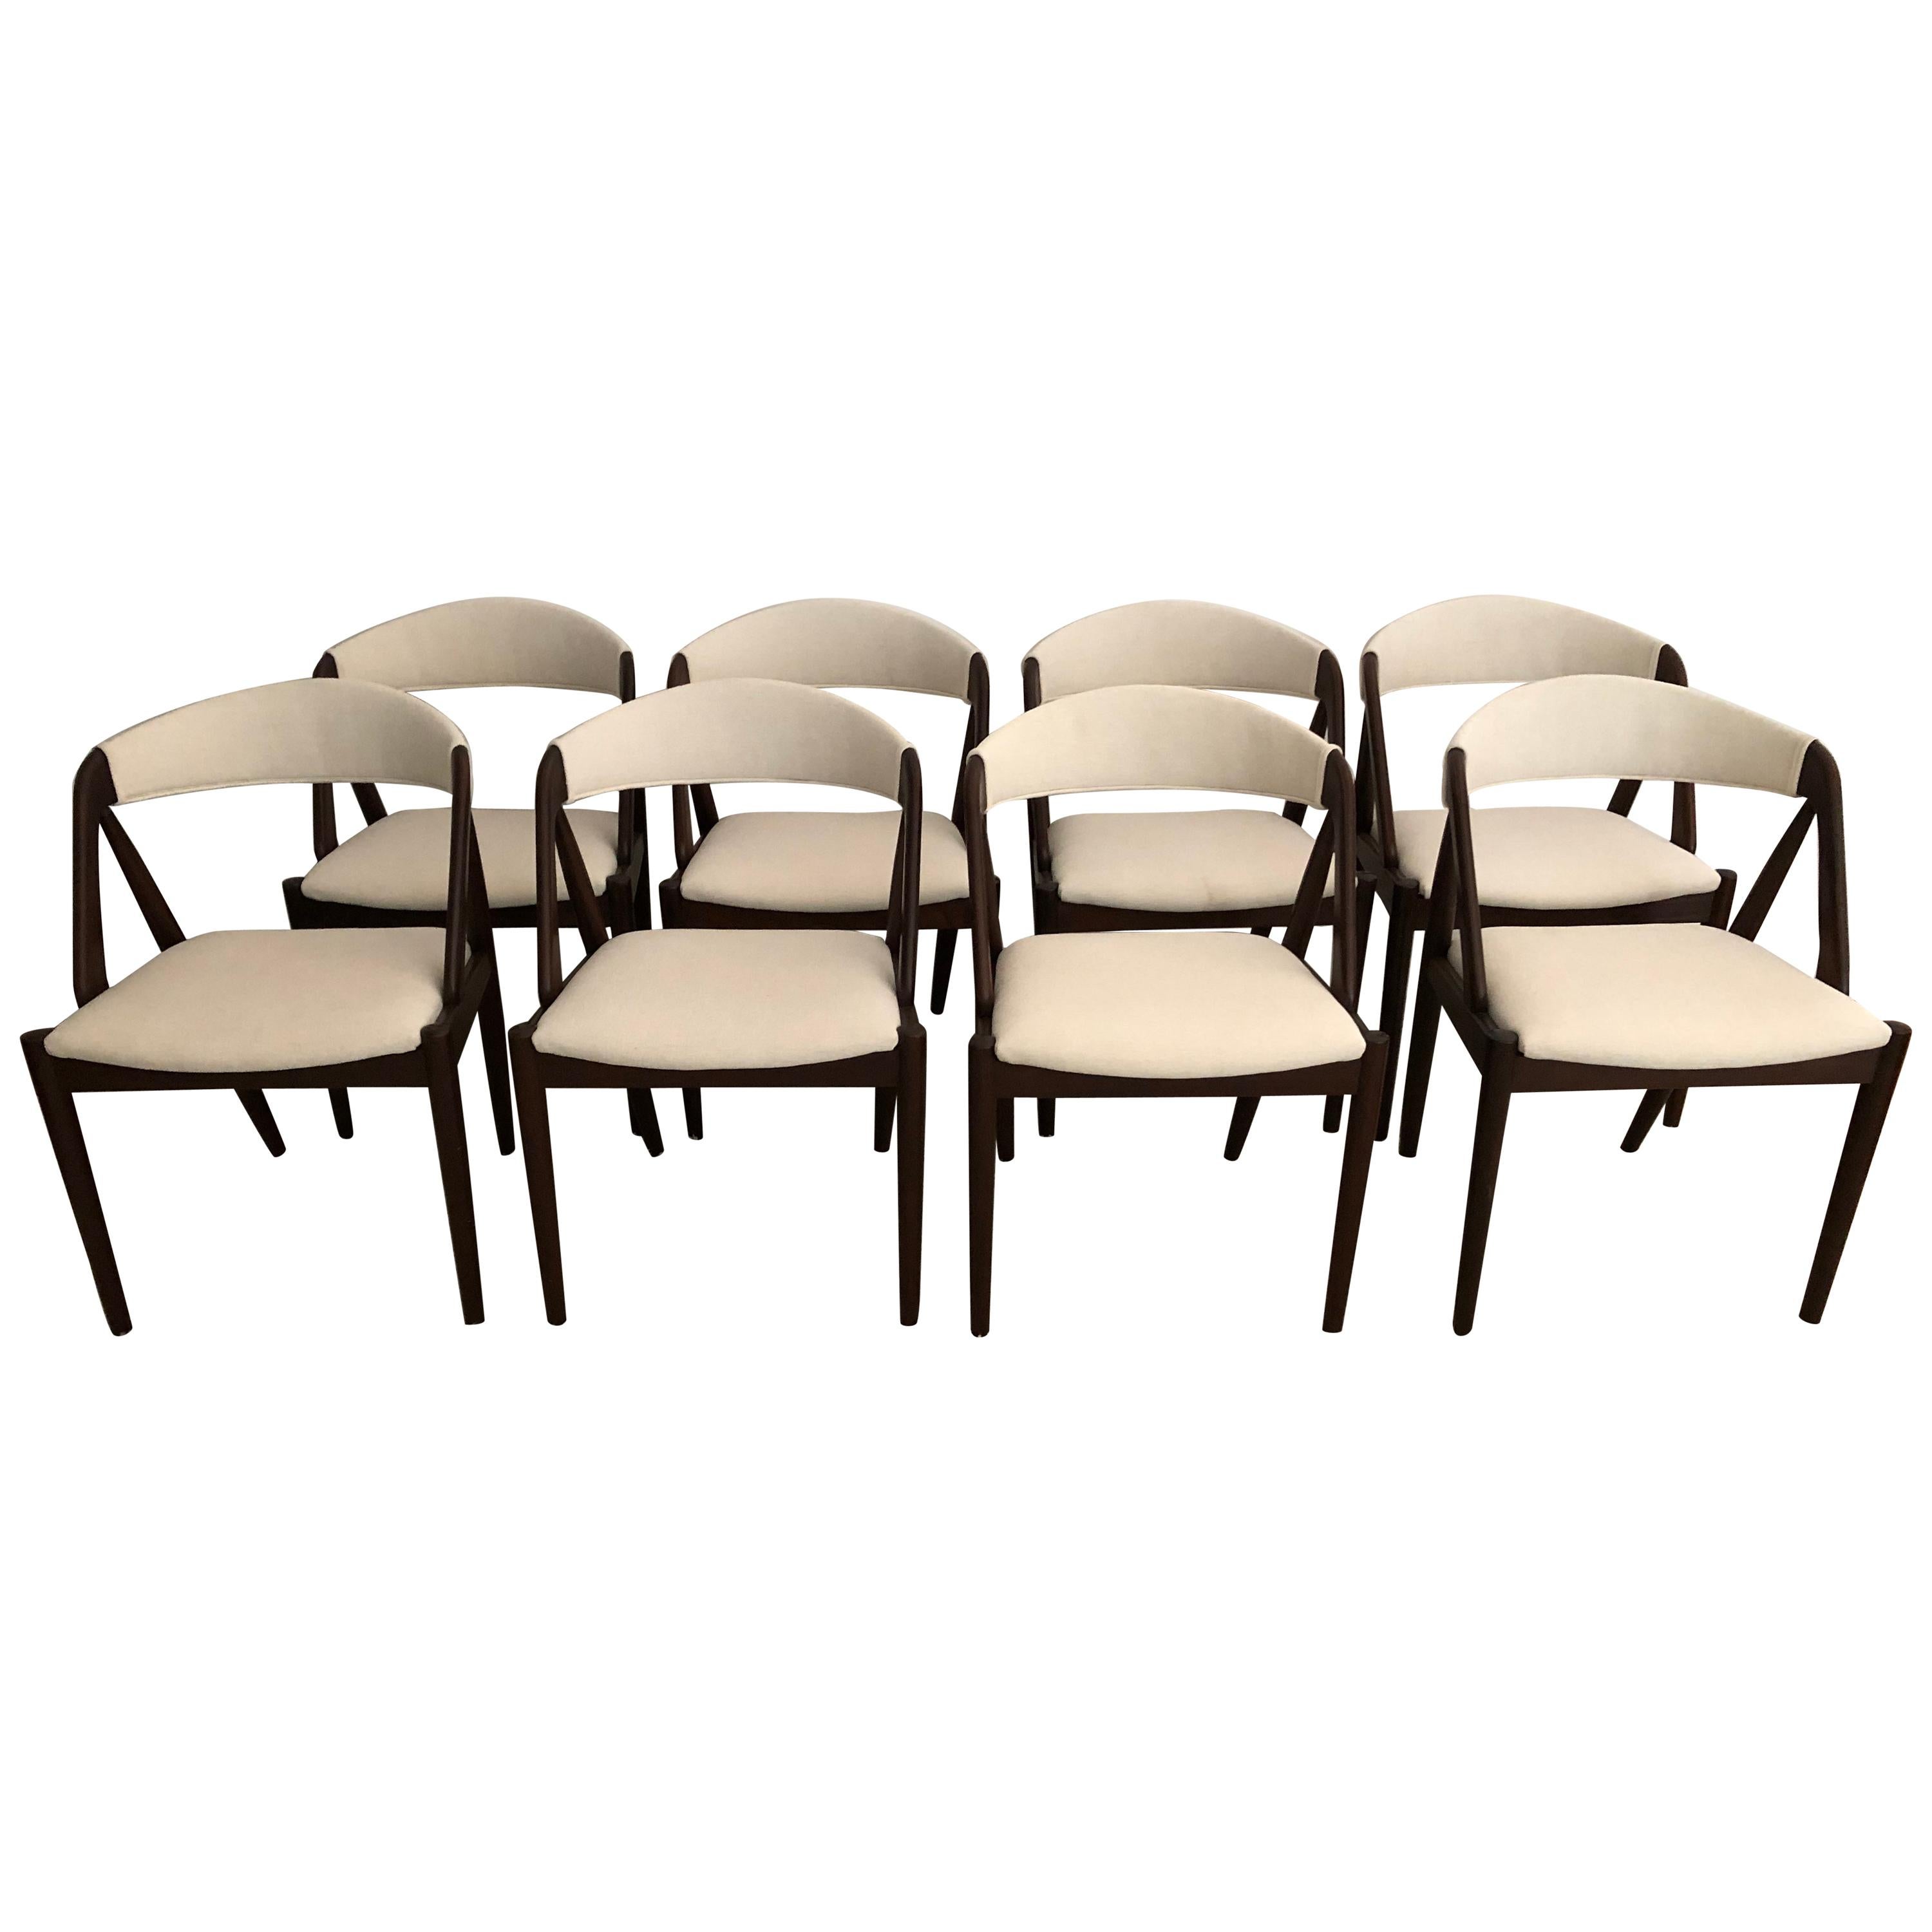 Set of 8 Kia Kristiansen Dining Chairs for Raymor Co